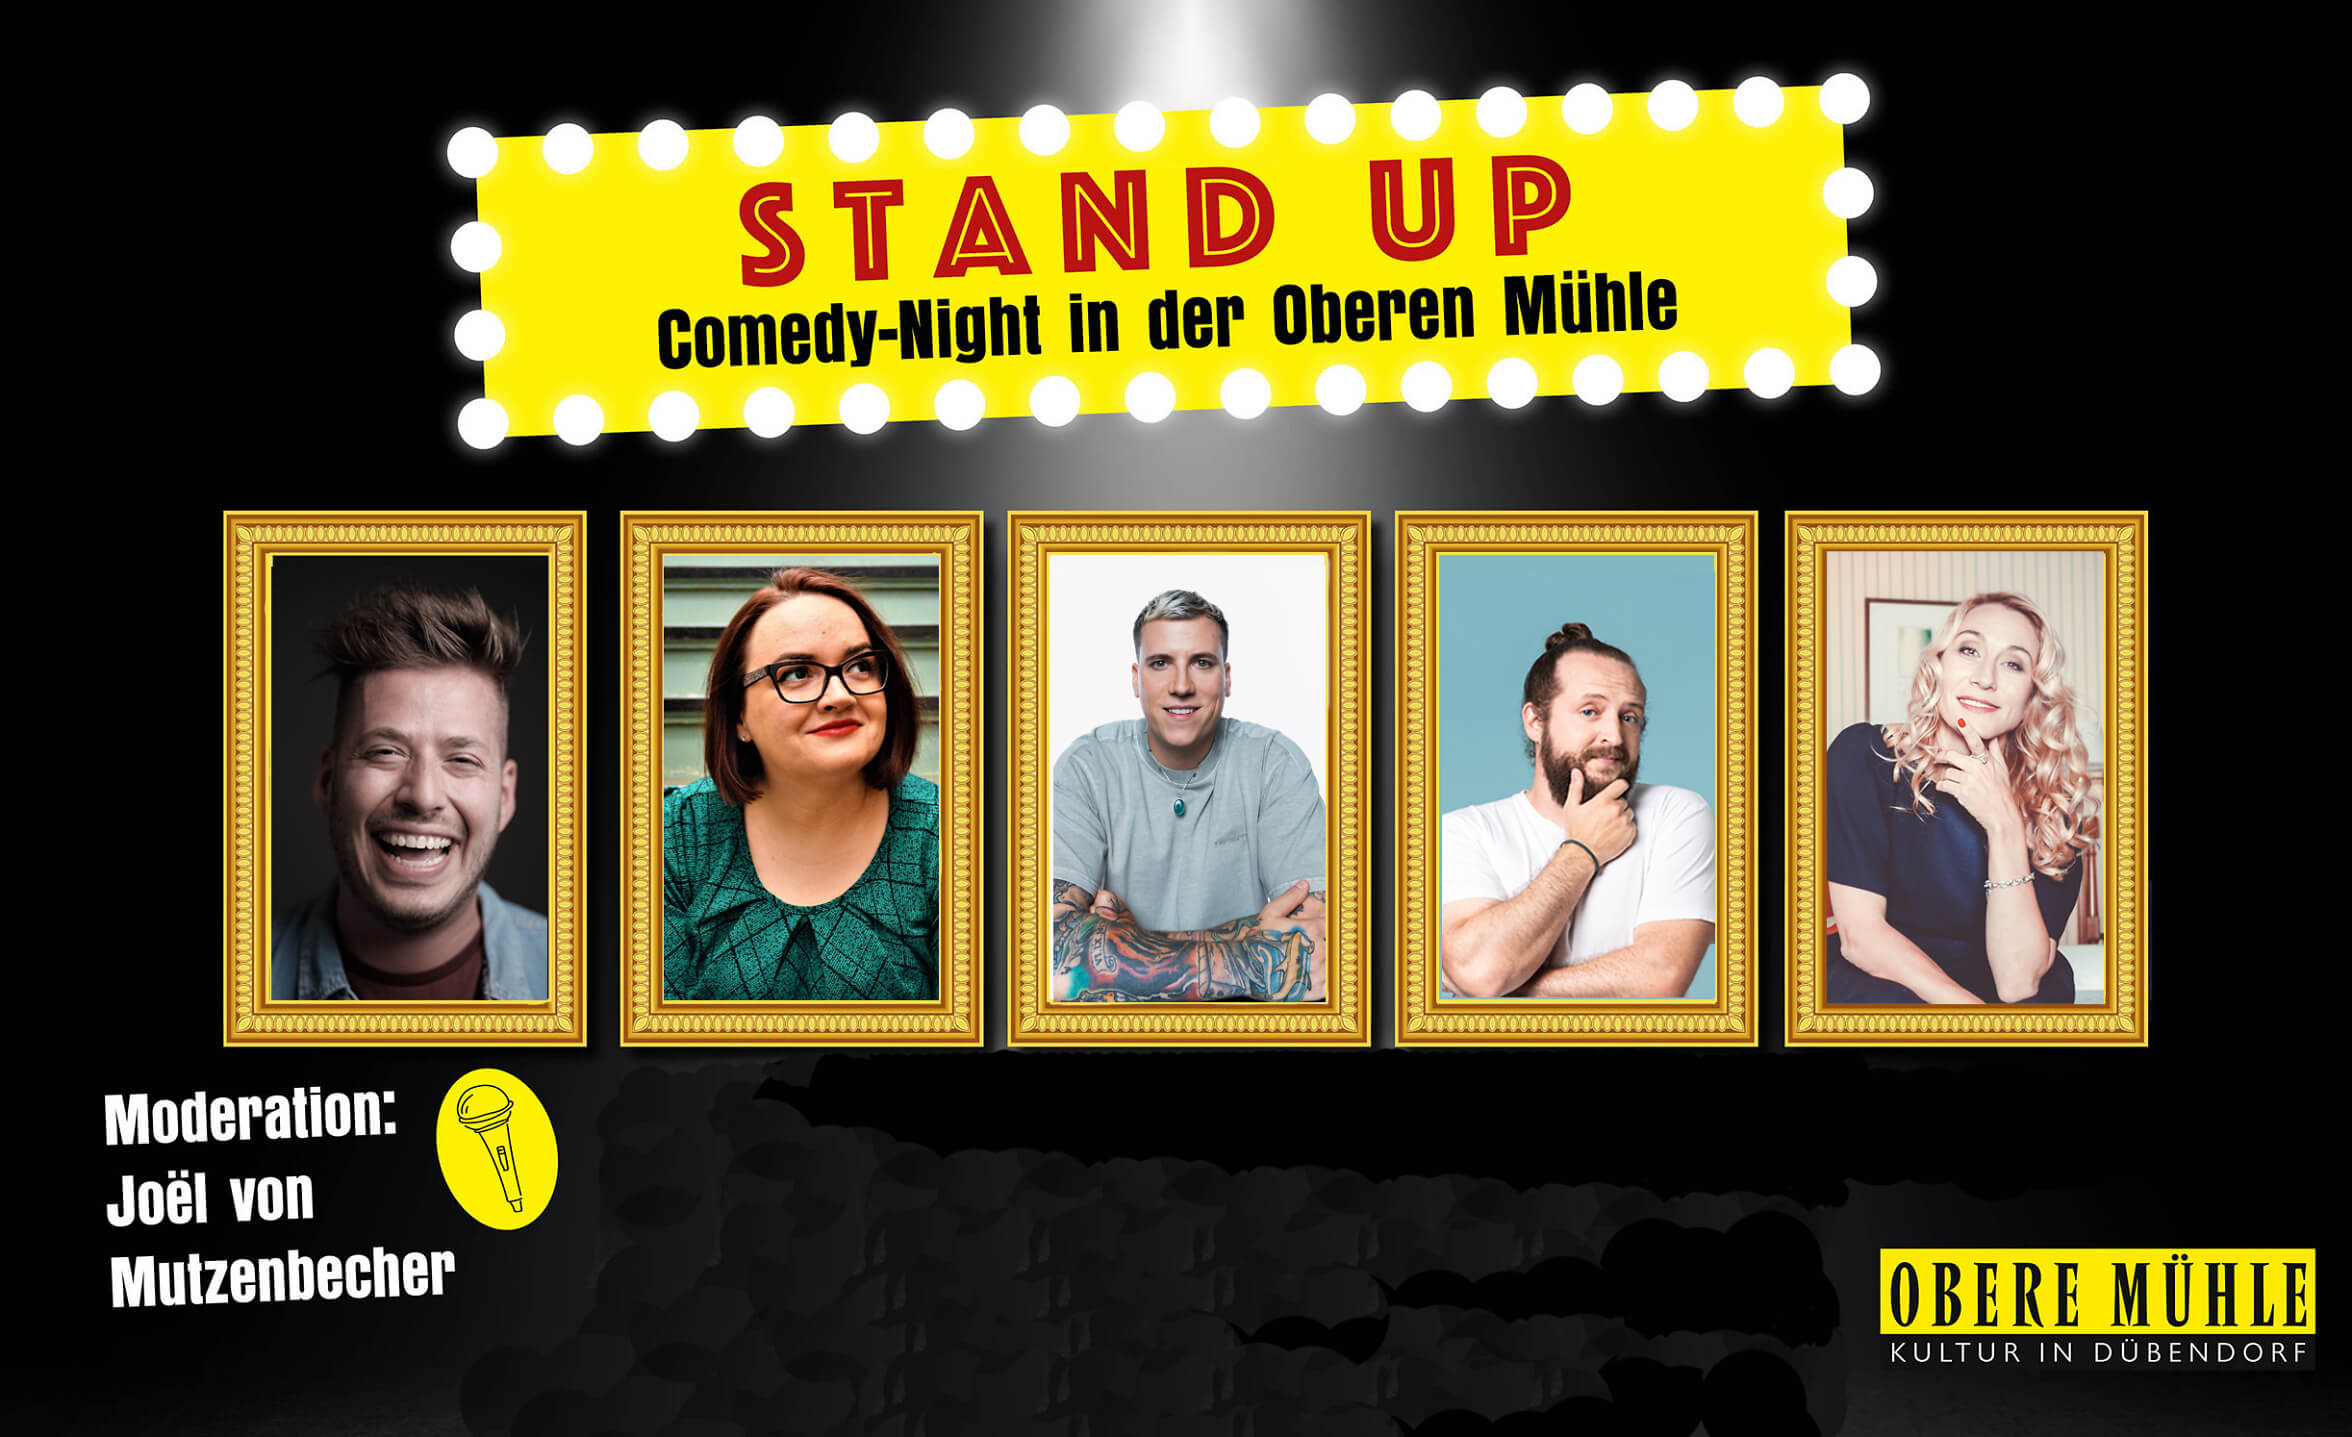 Event-Image for 'Stand UP - Comedy-Night in der Oberen Mühle'